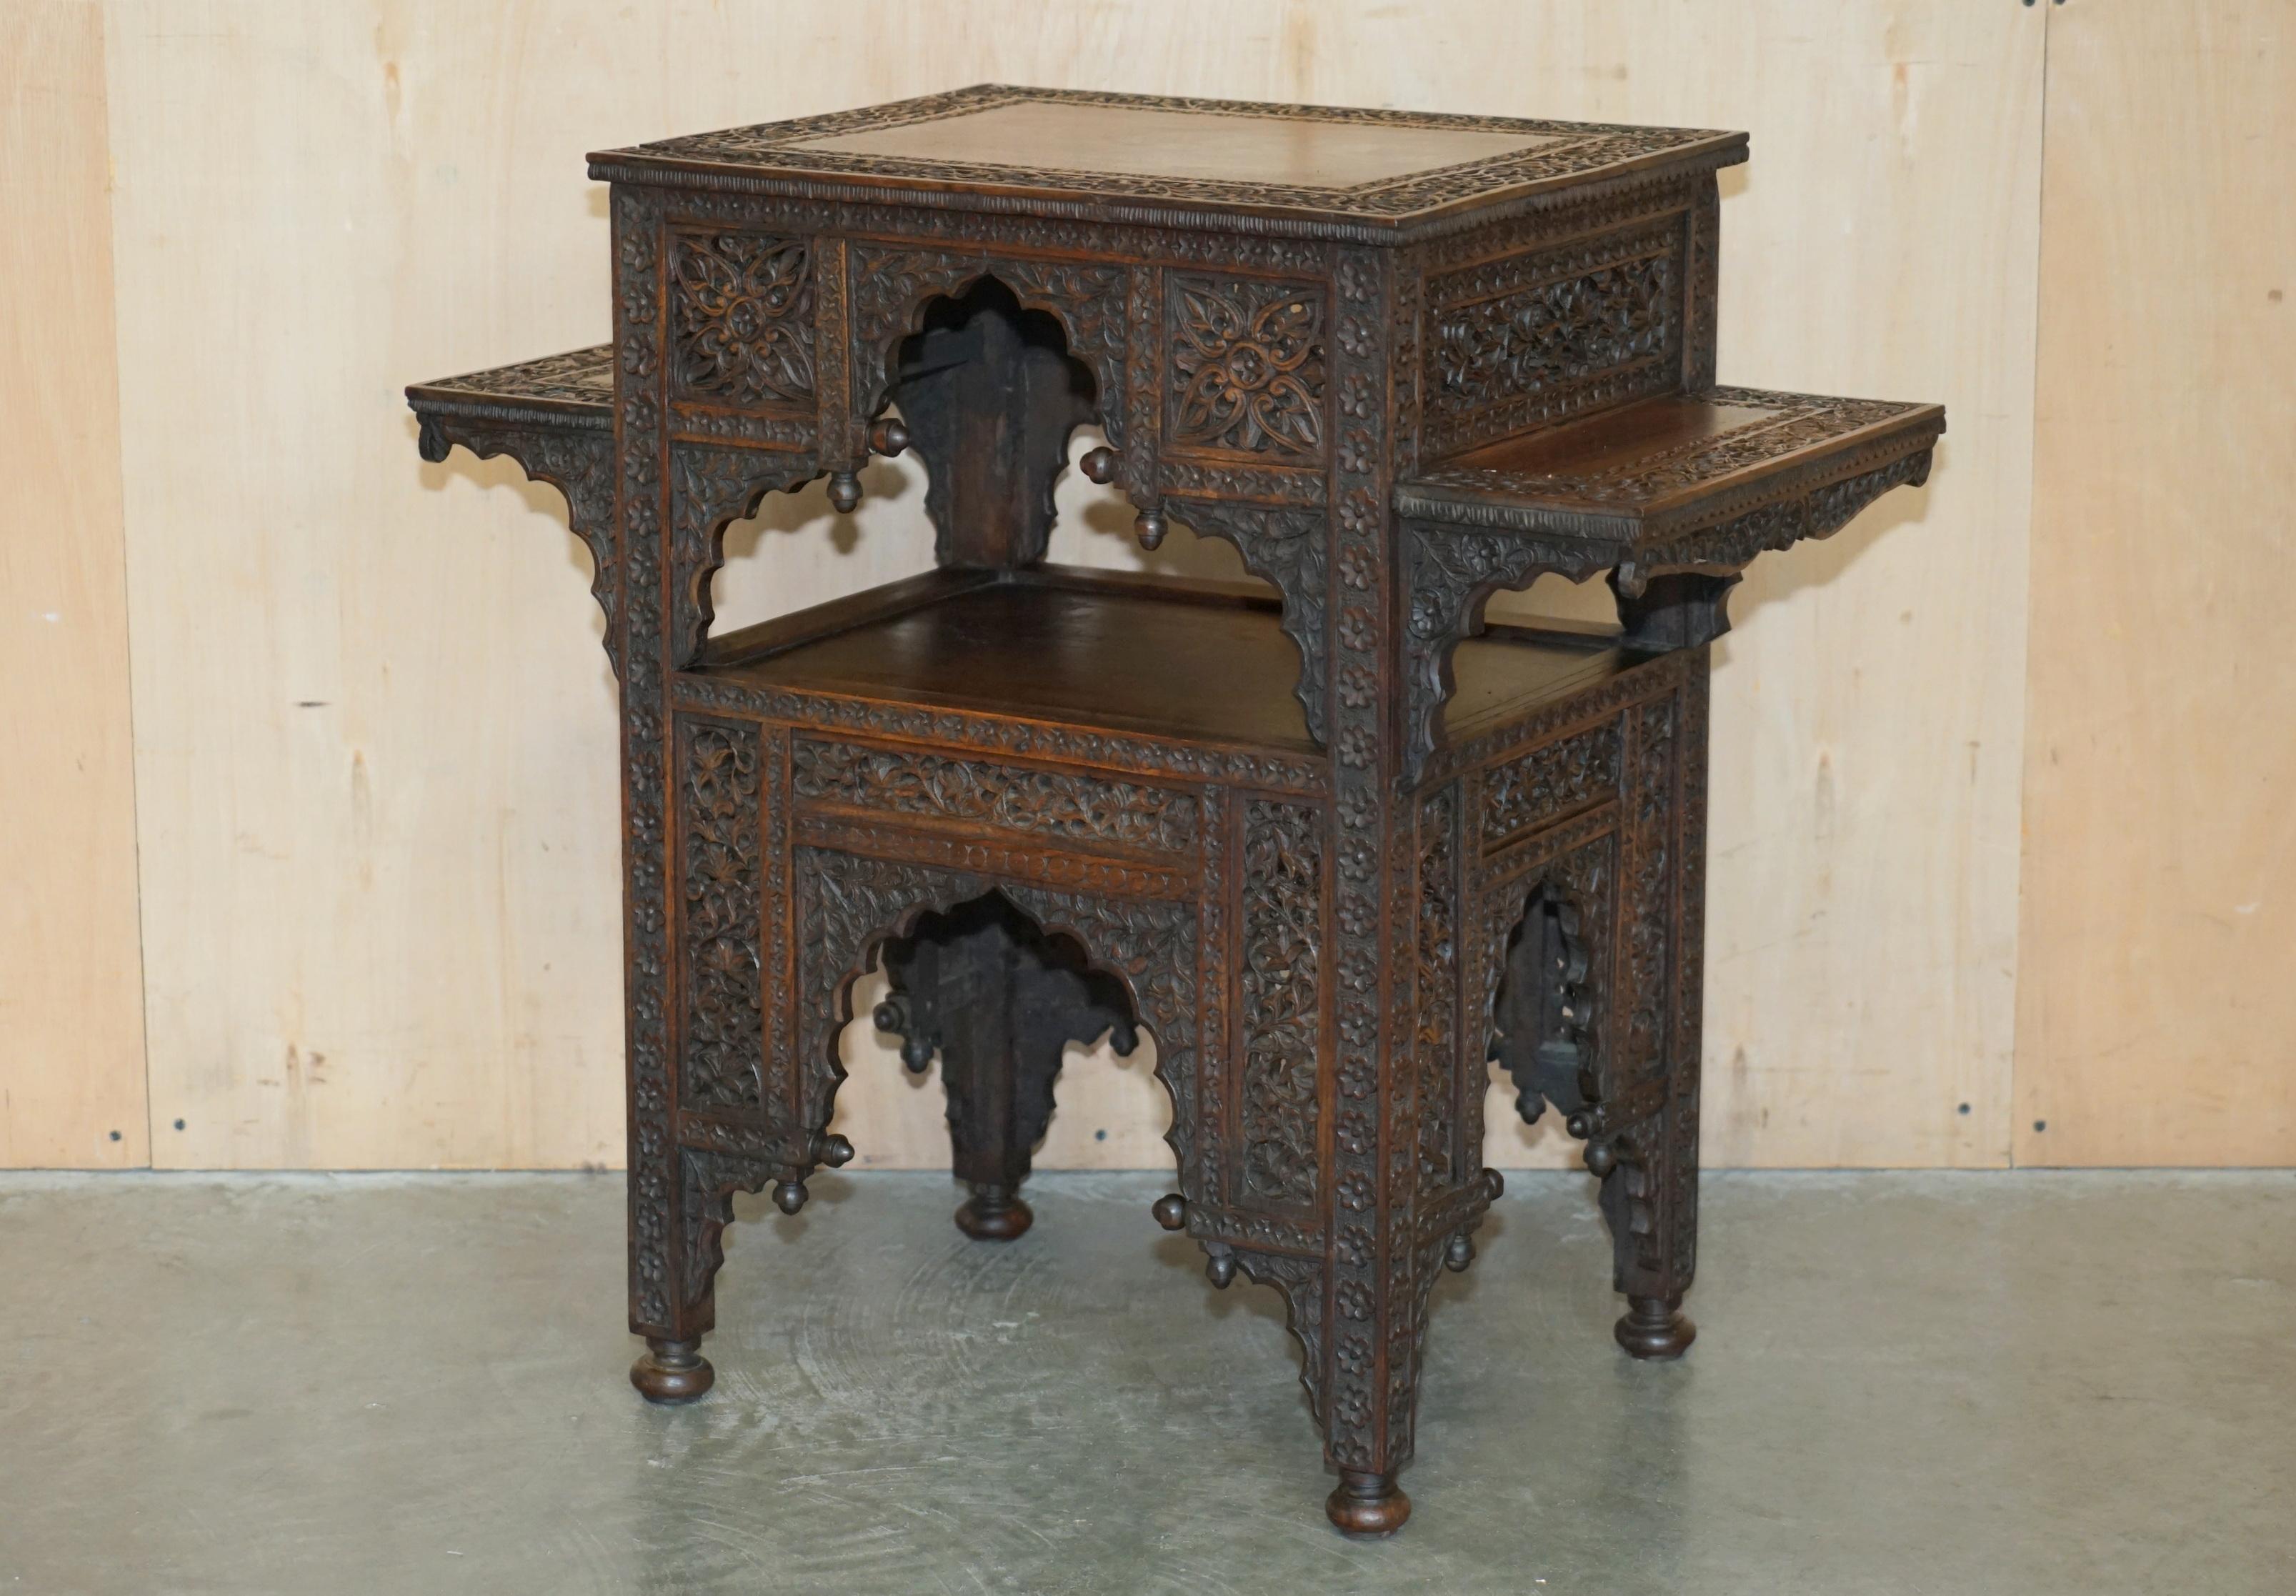 Royal House Antiques is delighted to offer for sale this exquisite, hand carved from top to bottom, four tier Liberty's of London Moorish occasional table 

Please note the delivery fee listed is just a guide, it covers within the M25 only for the